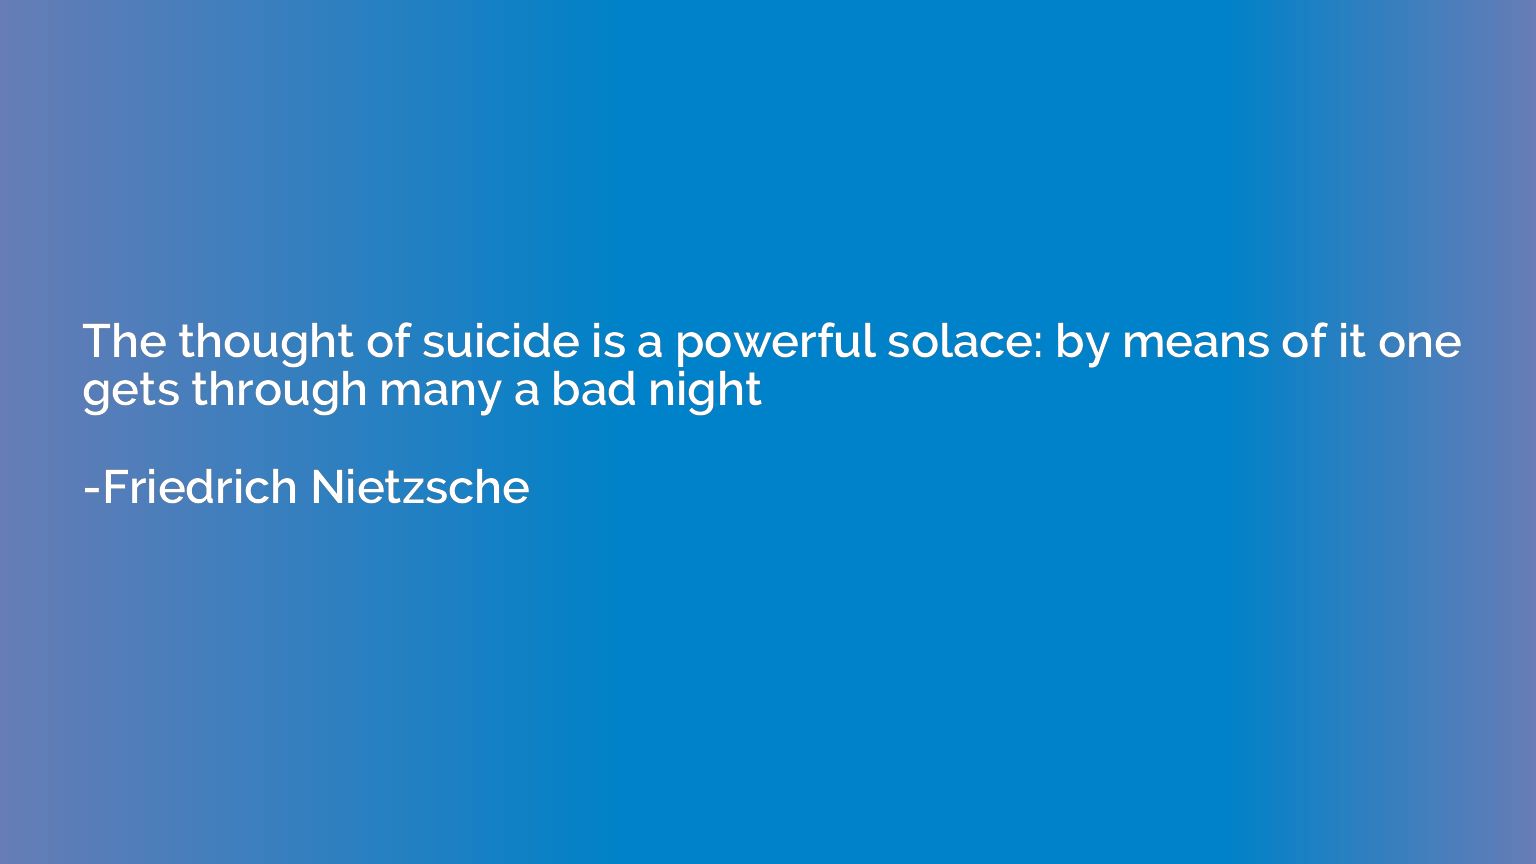 The thought of suicide is a powerful solace: by means of it 